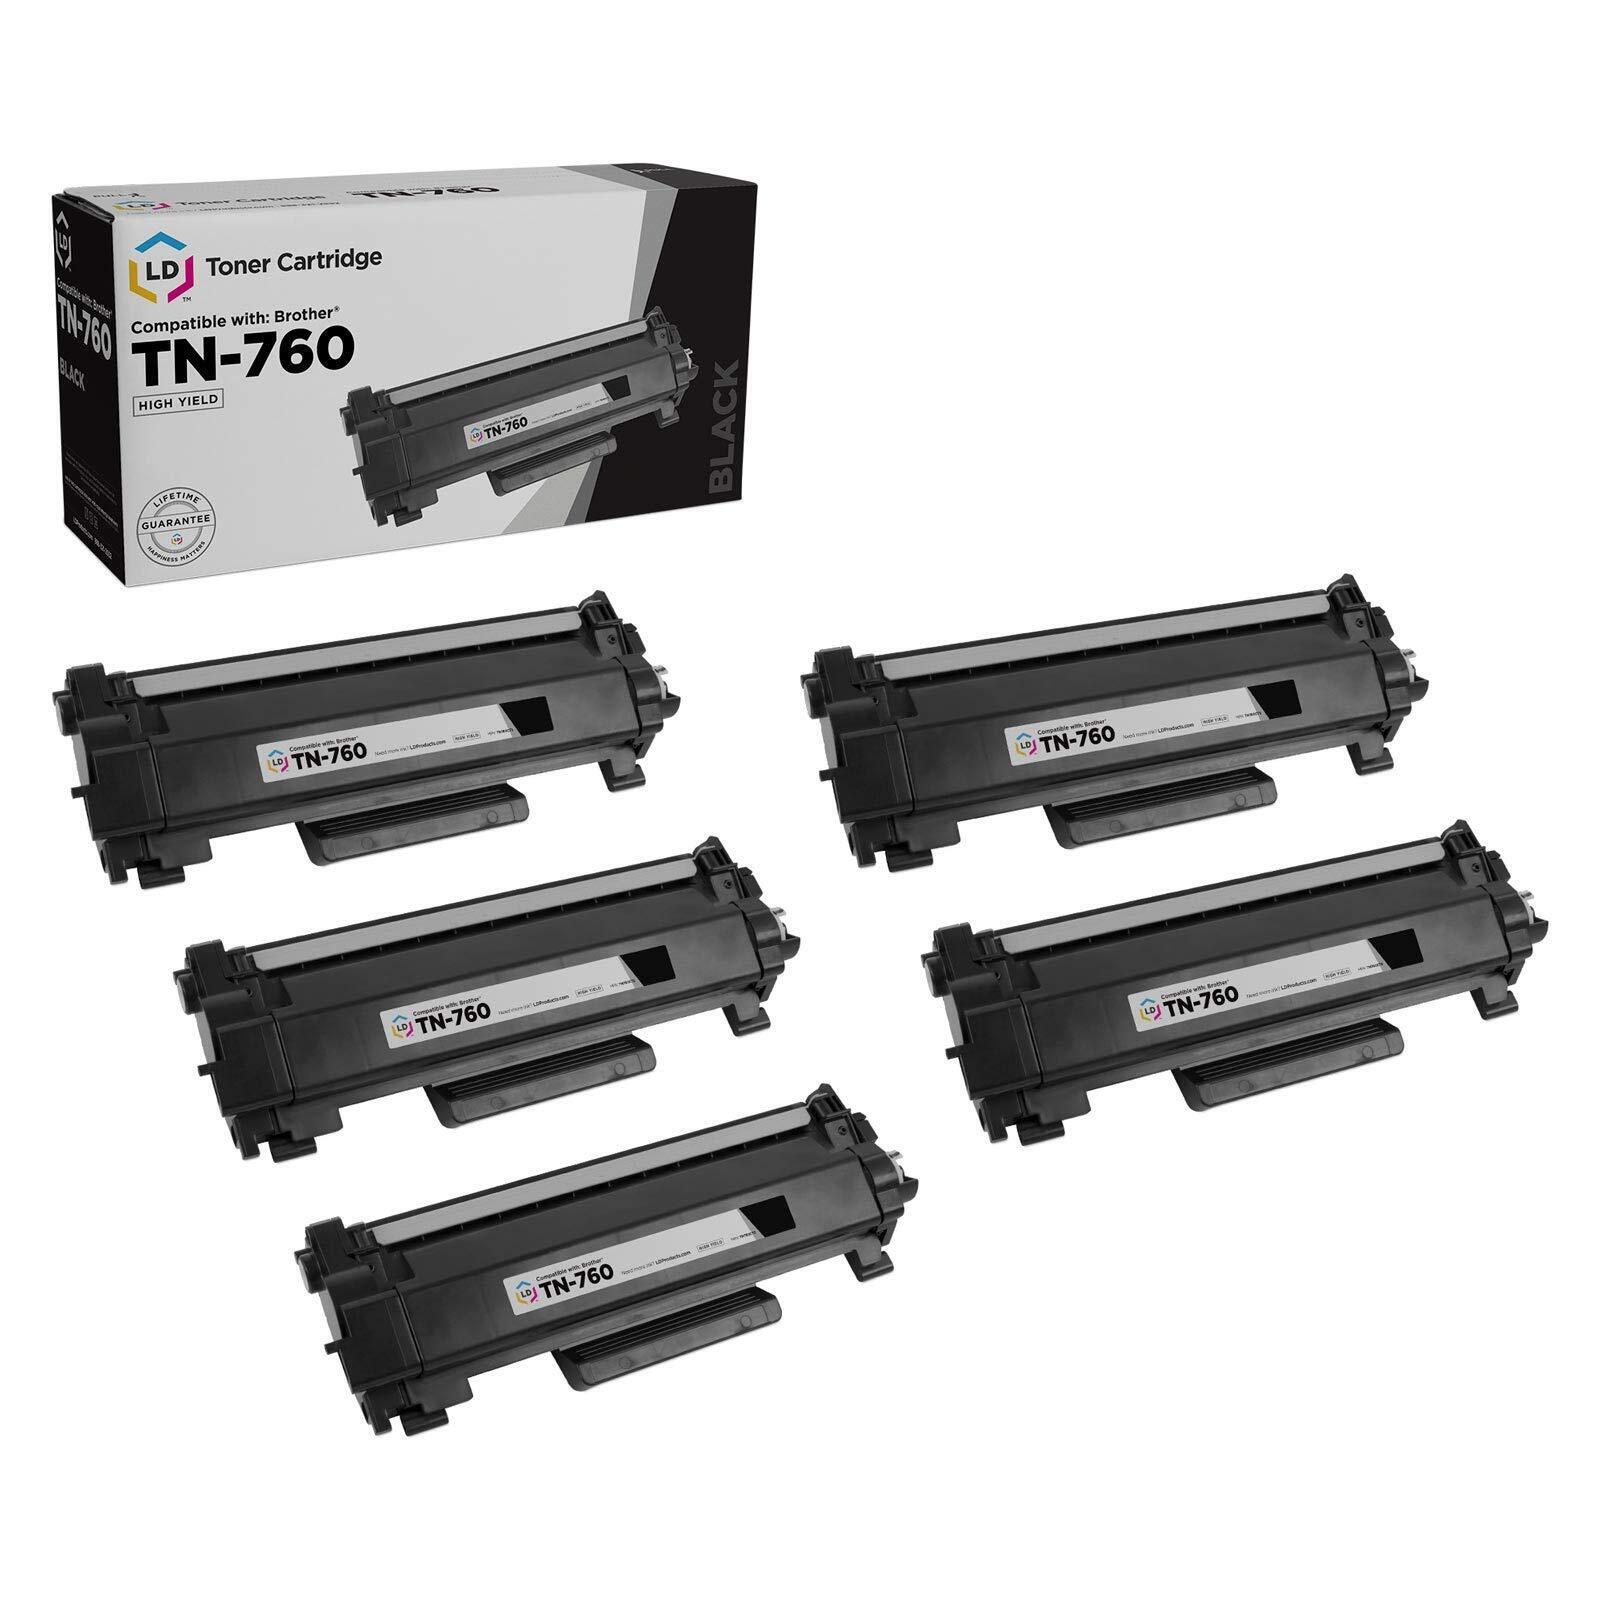 LD 5PK Replacement for Brother TN760 TN-760 High Yield Black Toner Cartridges